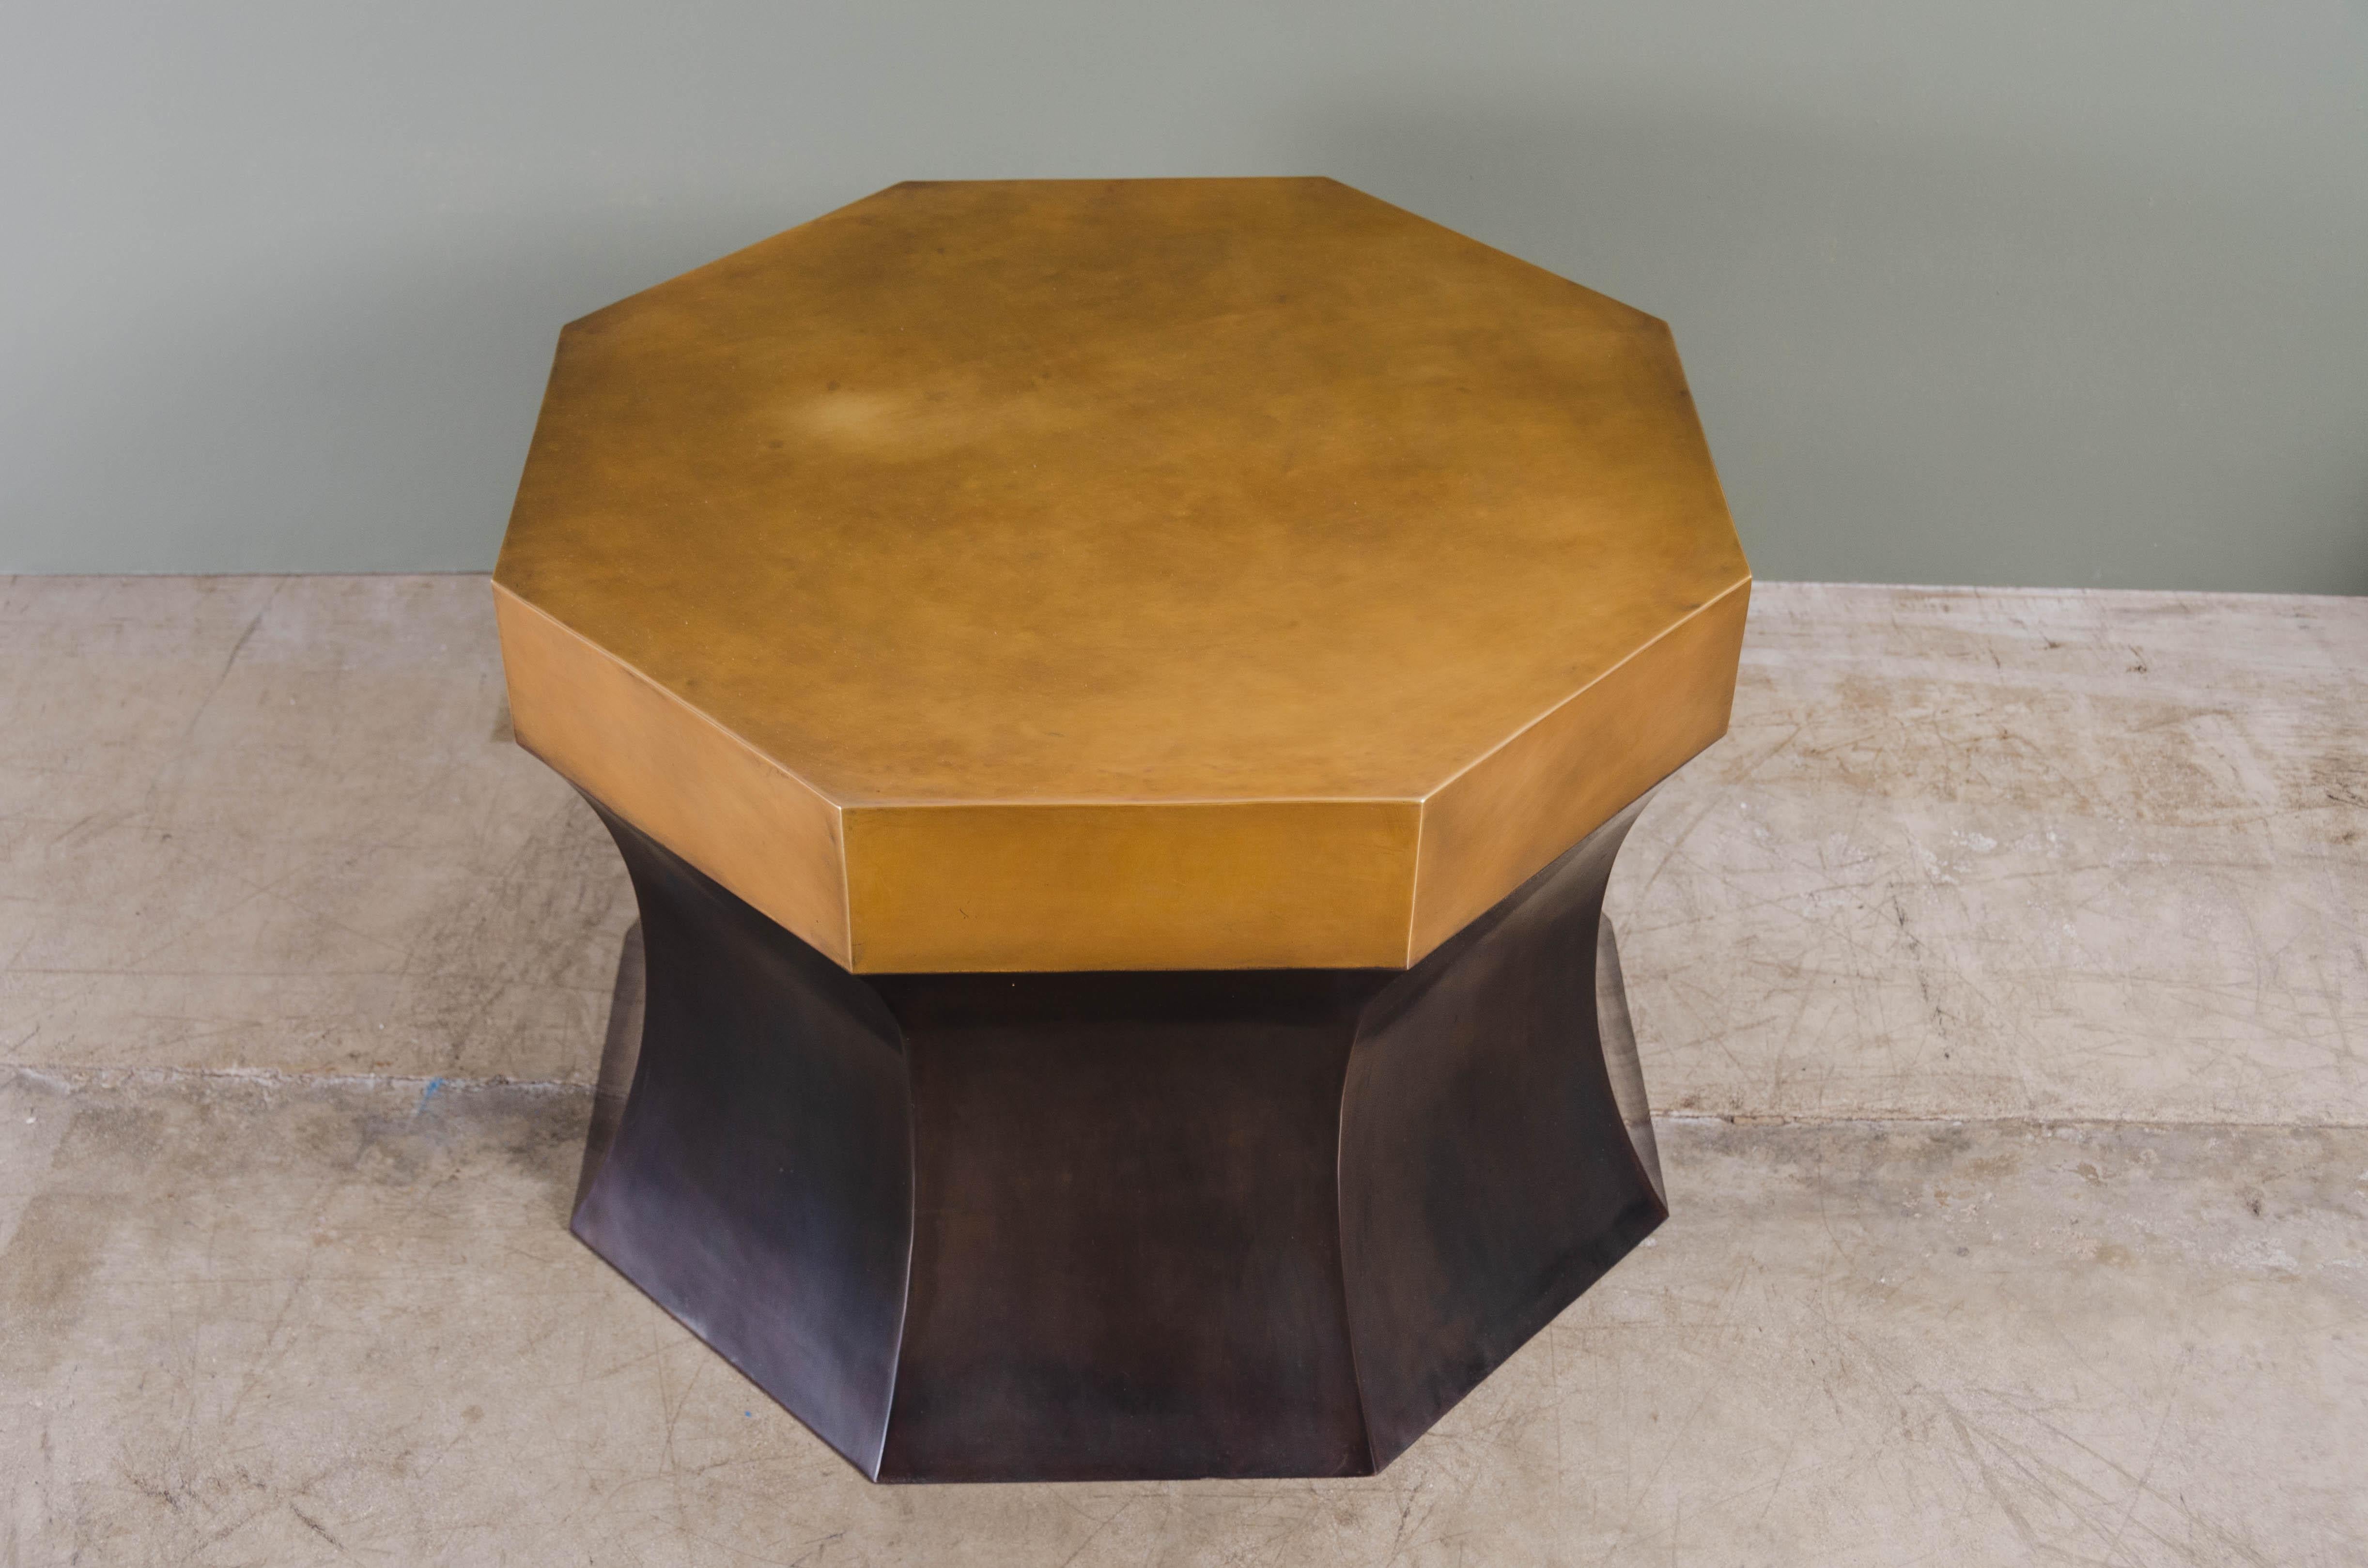 Octagonal side table with brass
Antique copper
Brass
Hand repoussé
Limited Edition

Repoussé is the traditional art of hand-hammering decorative relief onto sheet metal. The technique originated circa 800 BC between Asia and Europe and in